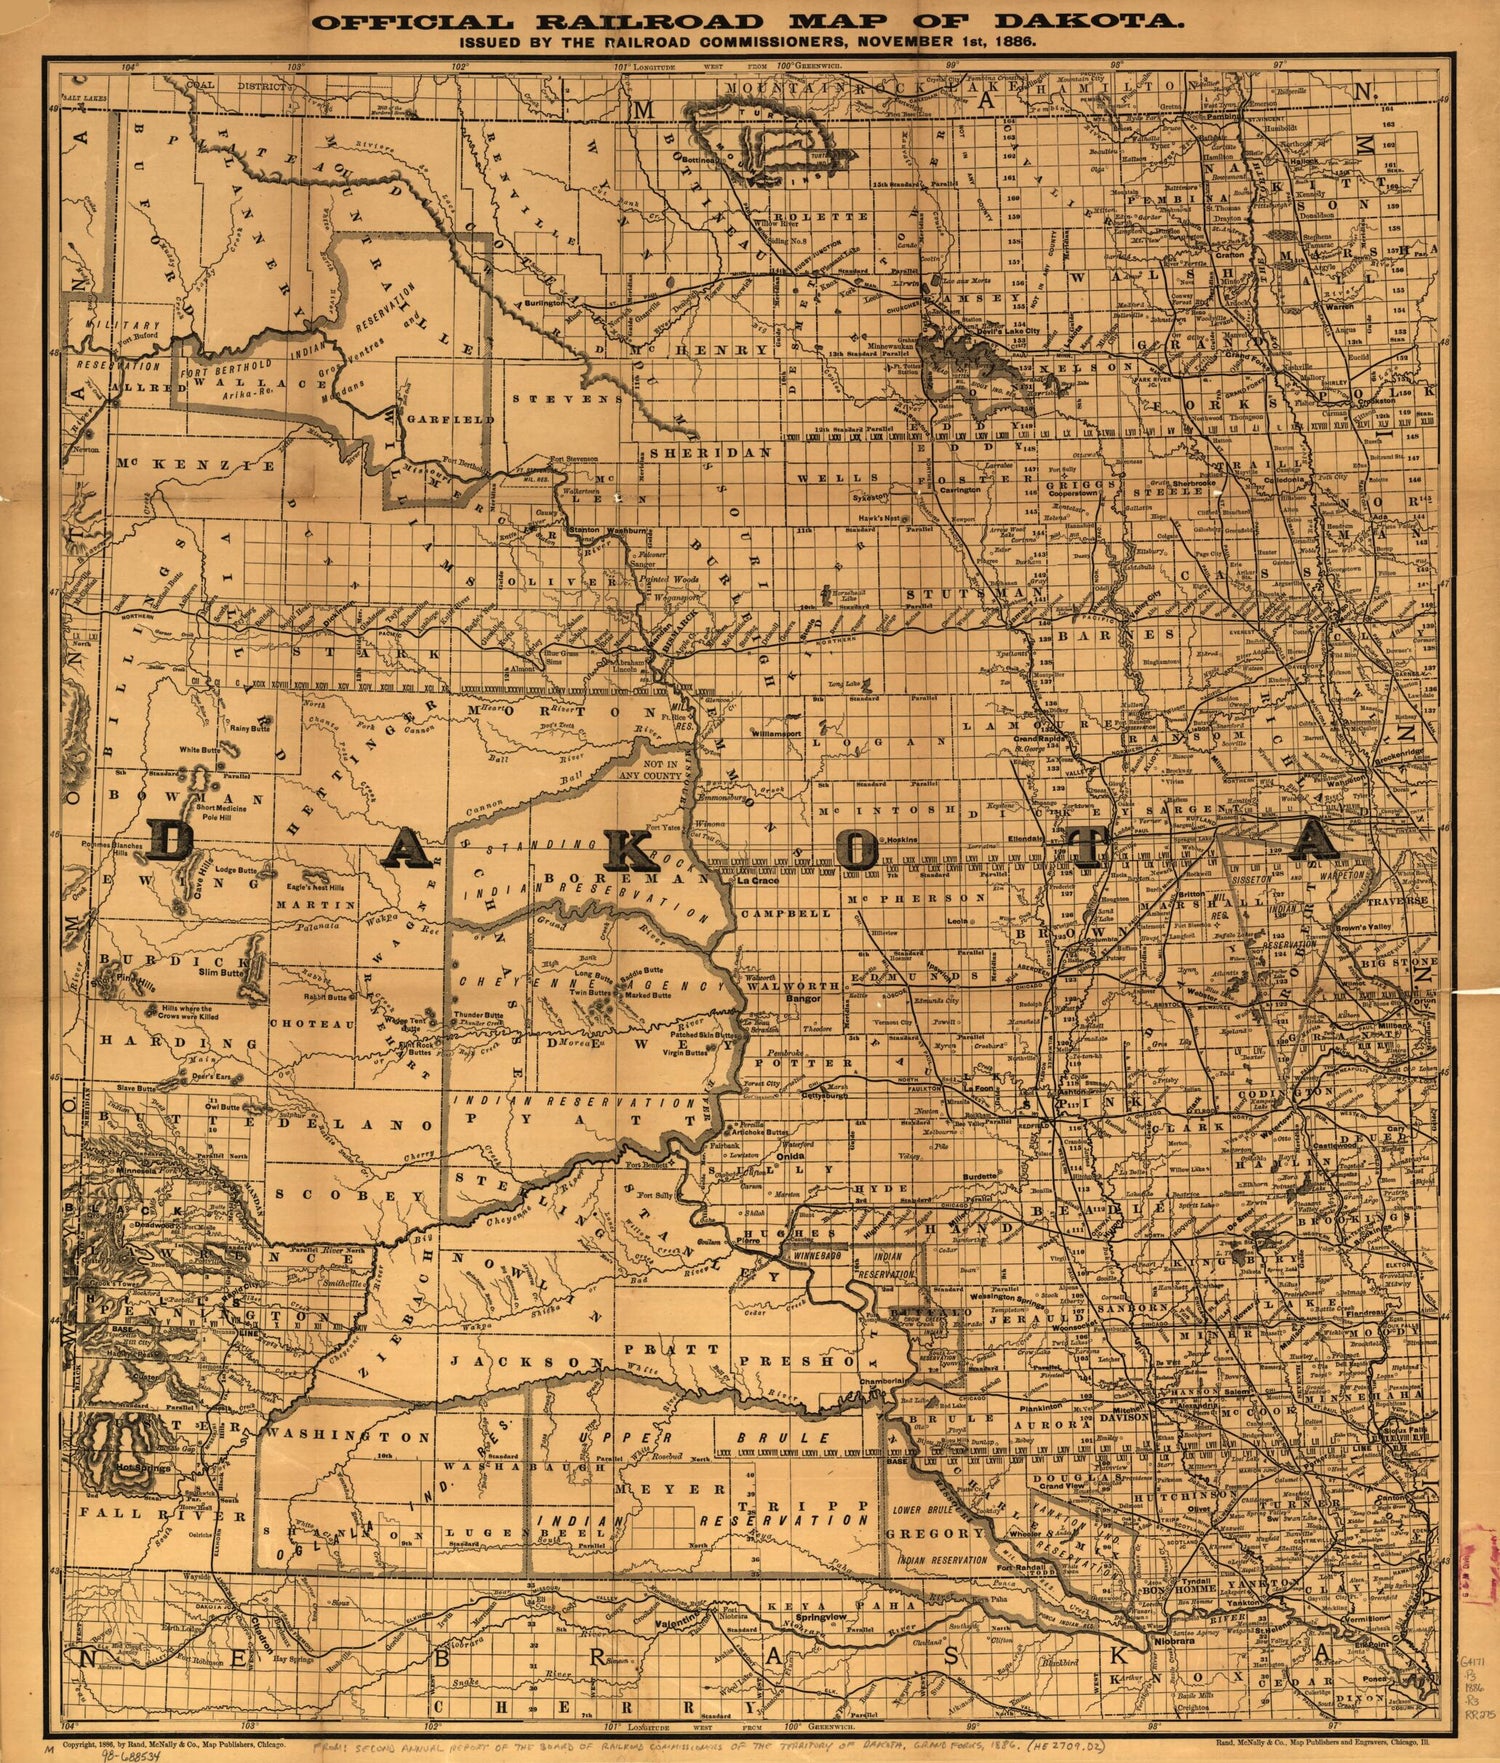 This old map of Official Railroad Map of Dakota Issued by the Railroad Commissioners, November 1st, from 1886 was created by  Rand McNally and Company in 1886